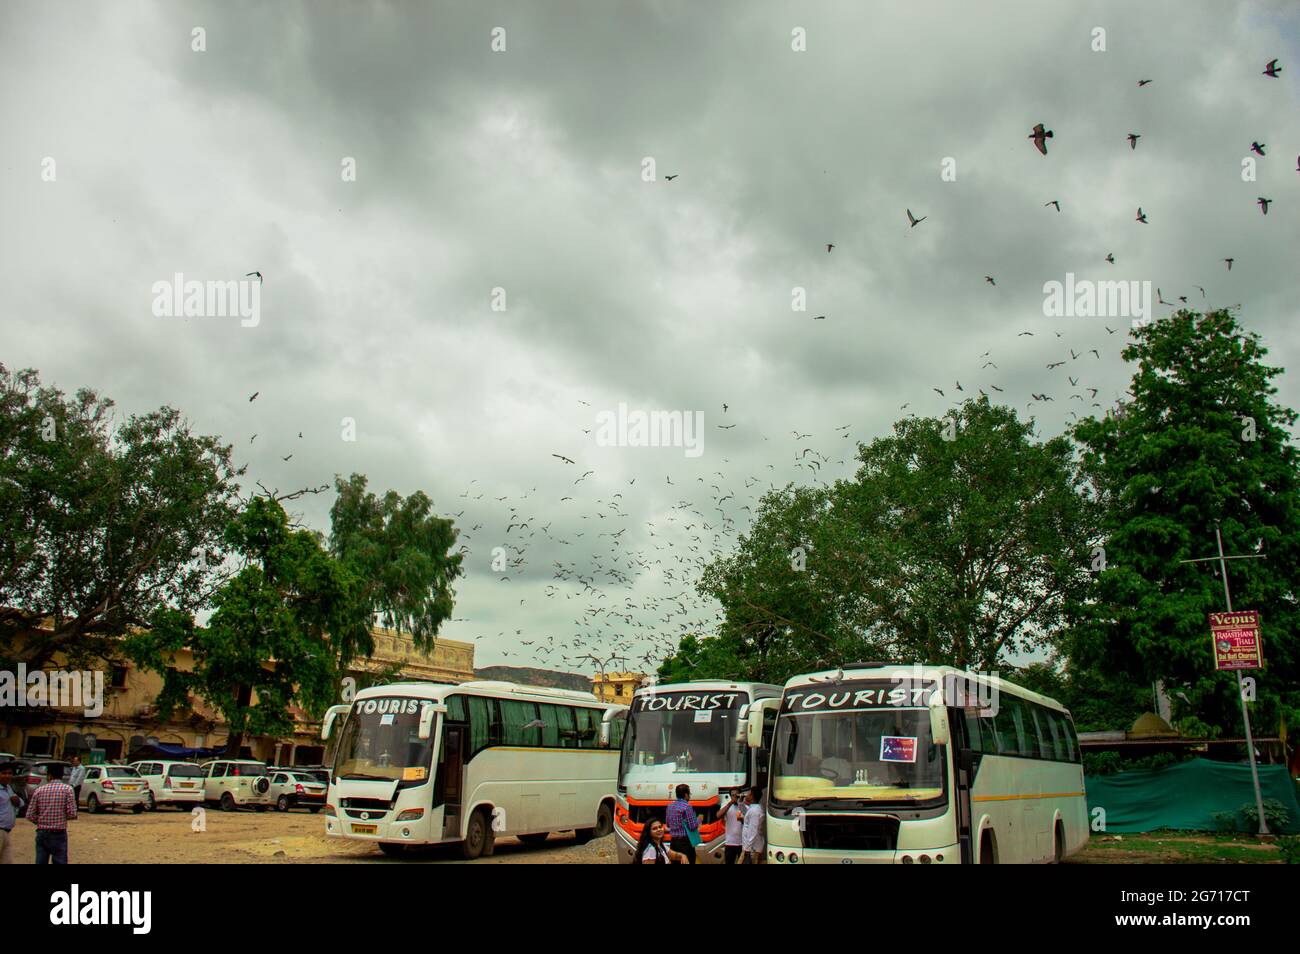 Landscape of jaipur about a bus station. Stock Photo